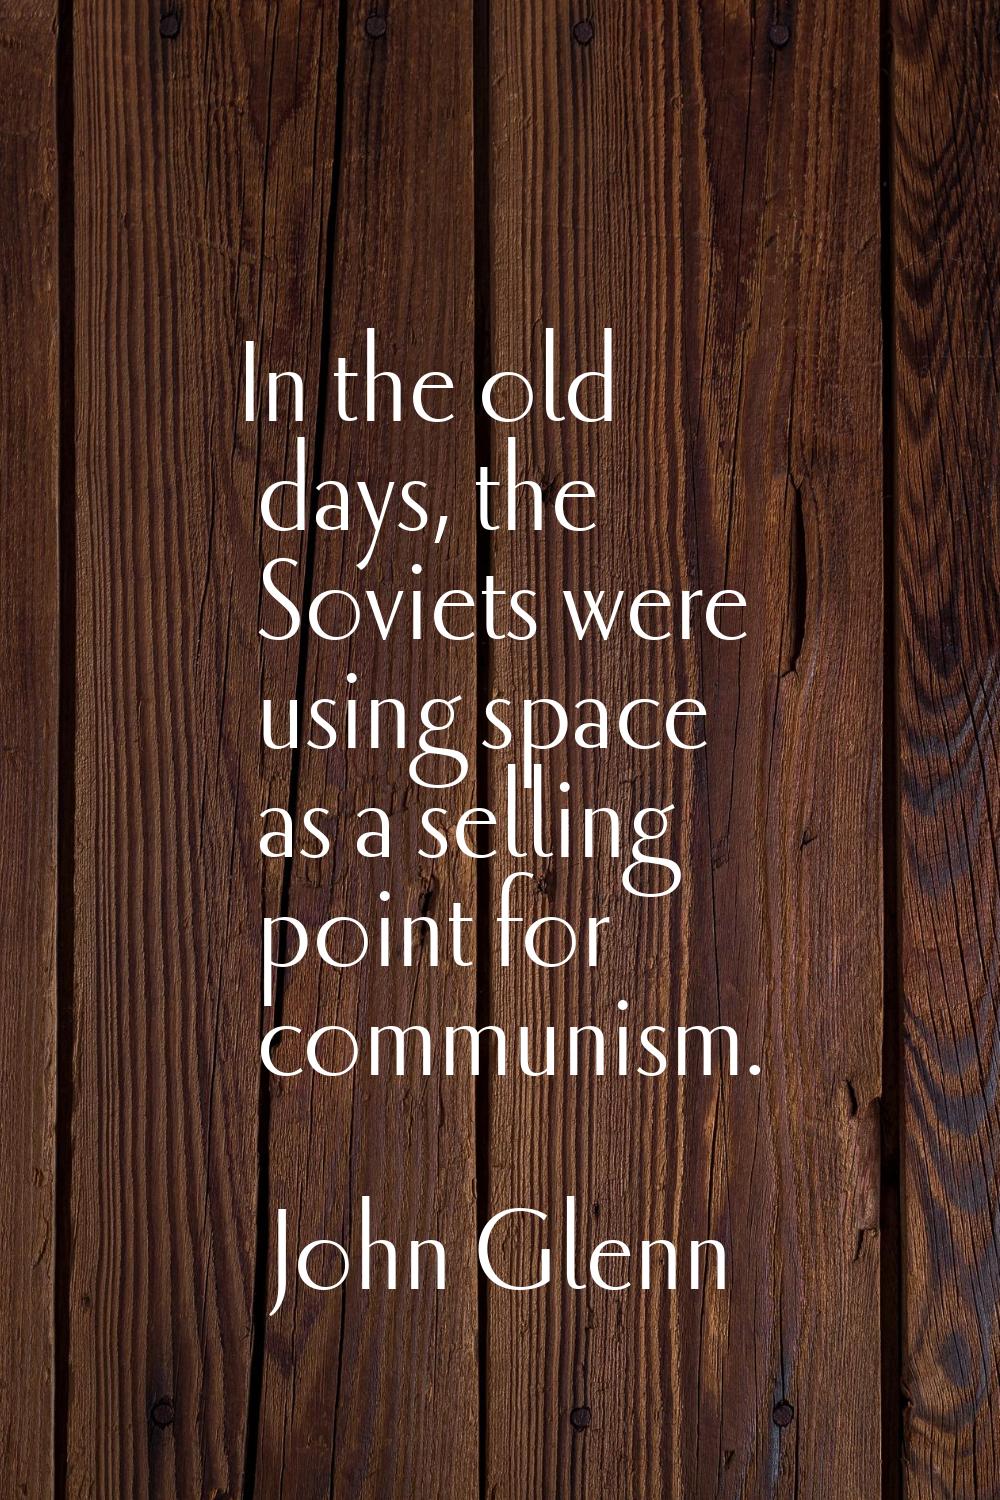 In the old days, the Soviets were using space as a selling point for communism.